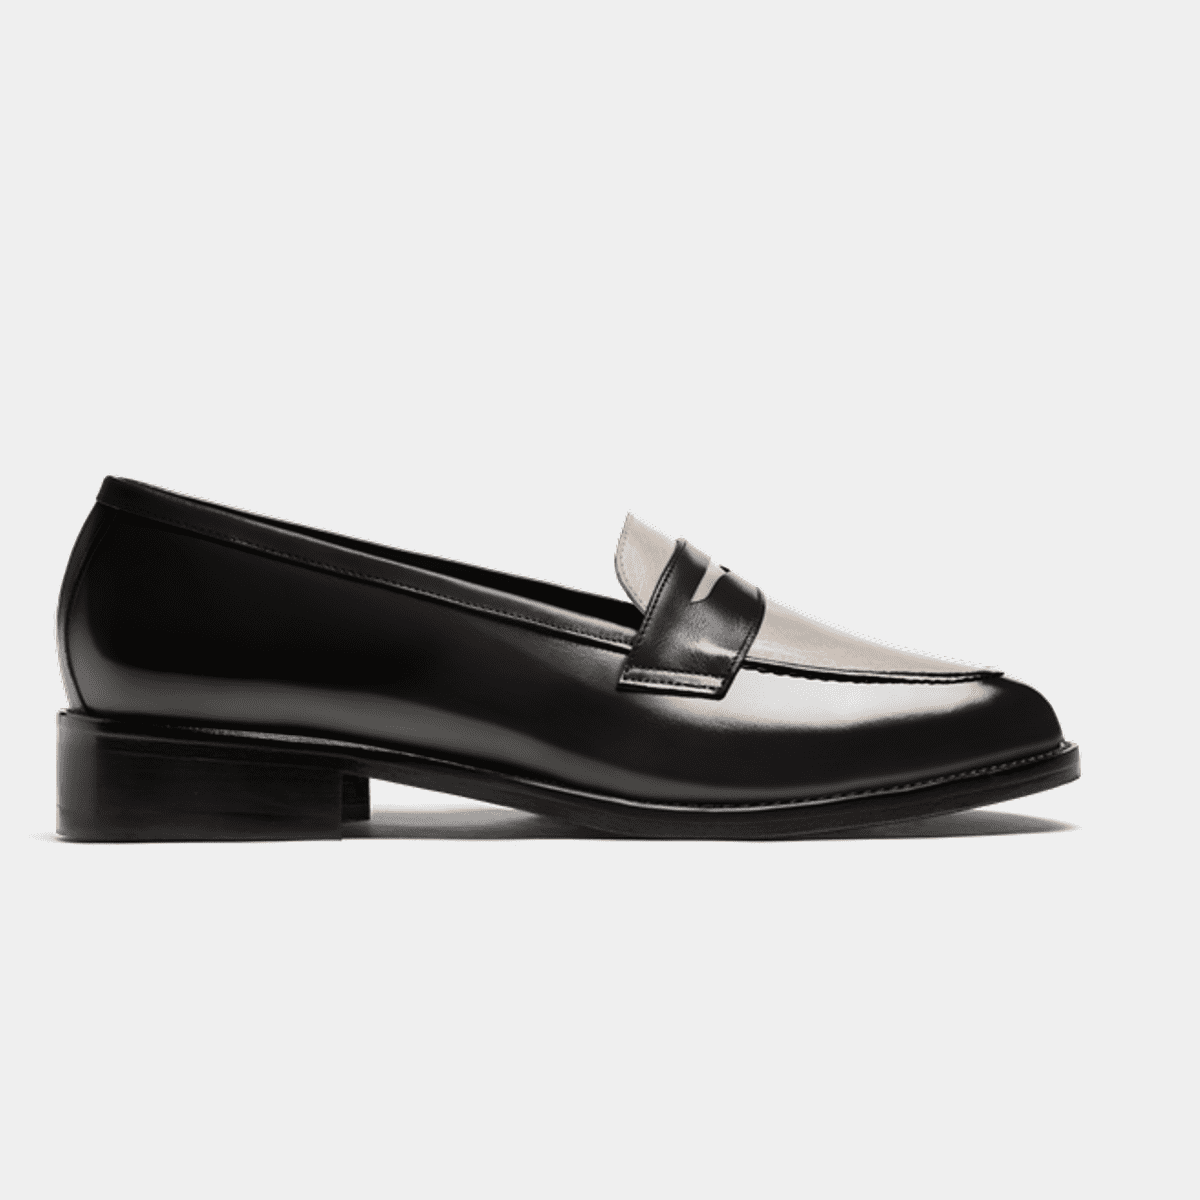 Penny Loafer - black flora leather | Sumissura